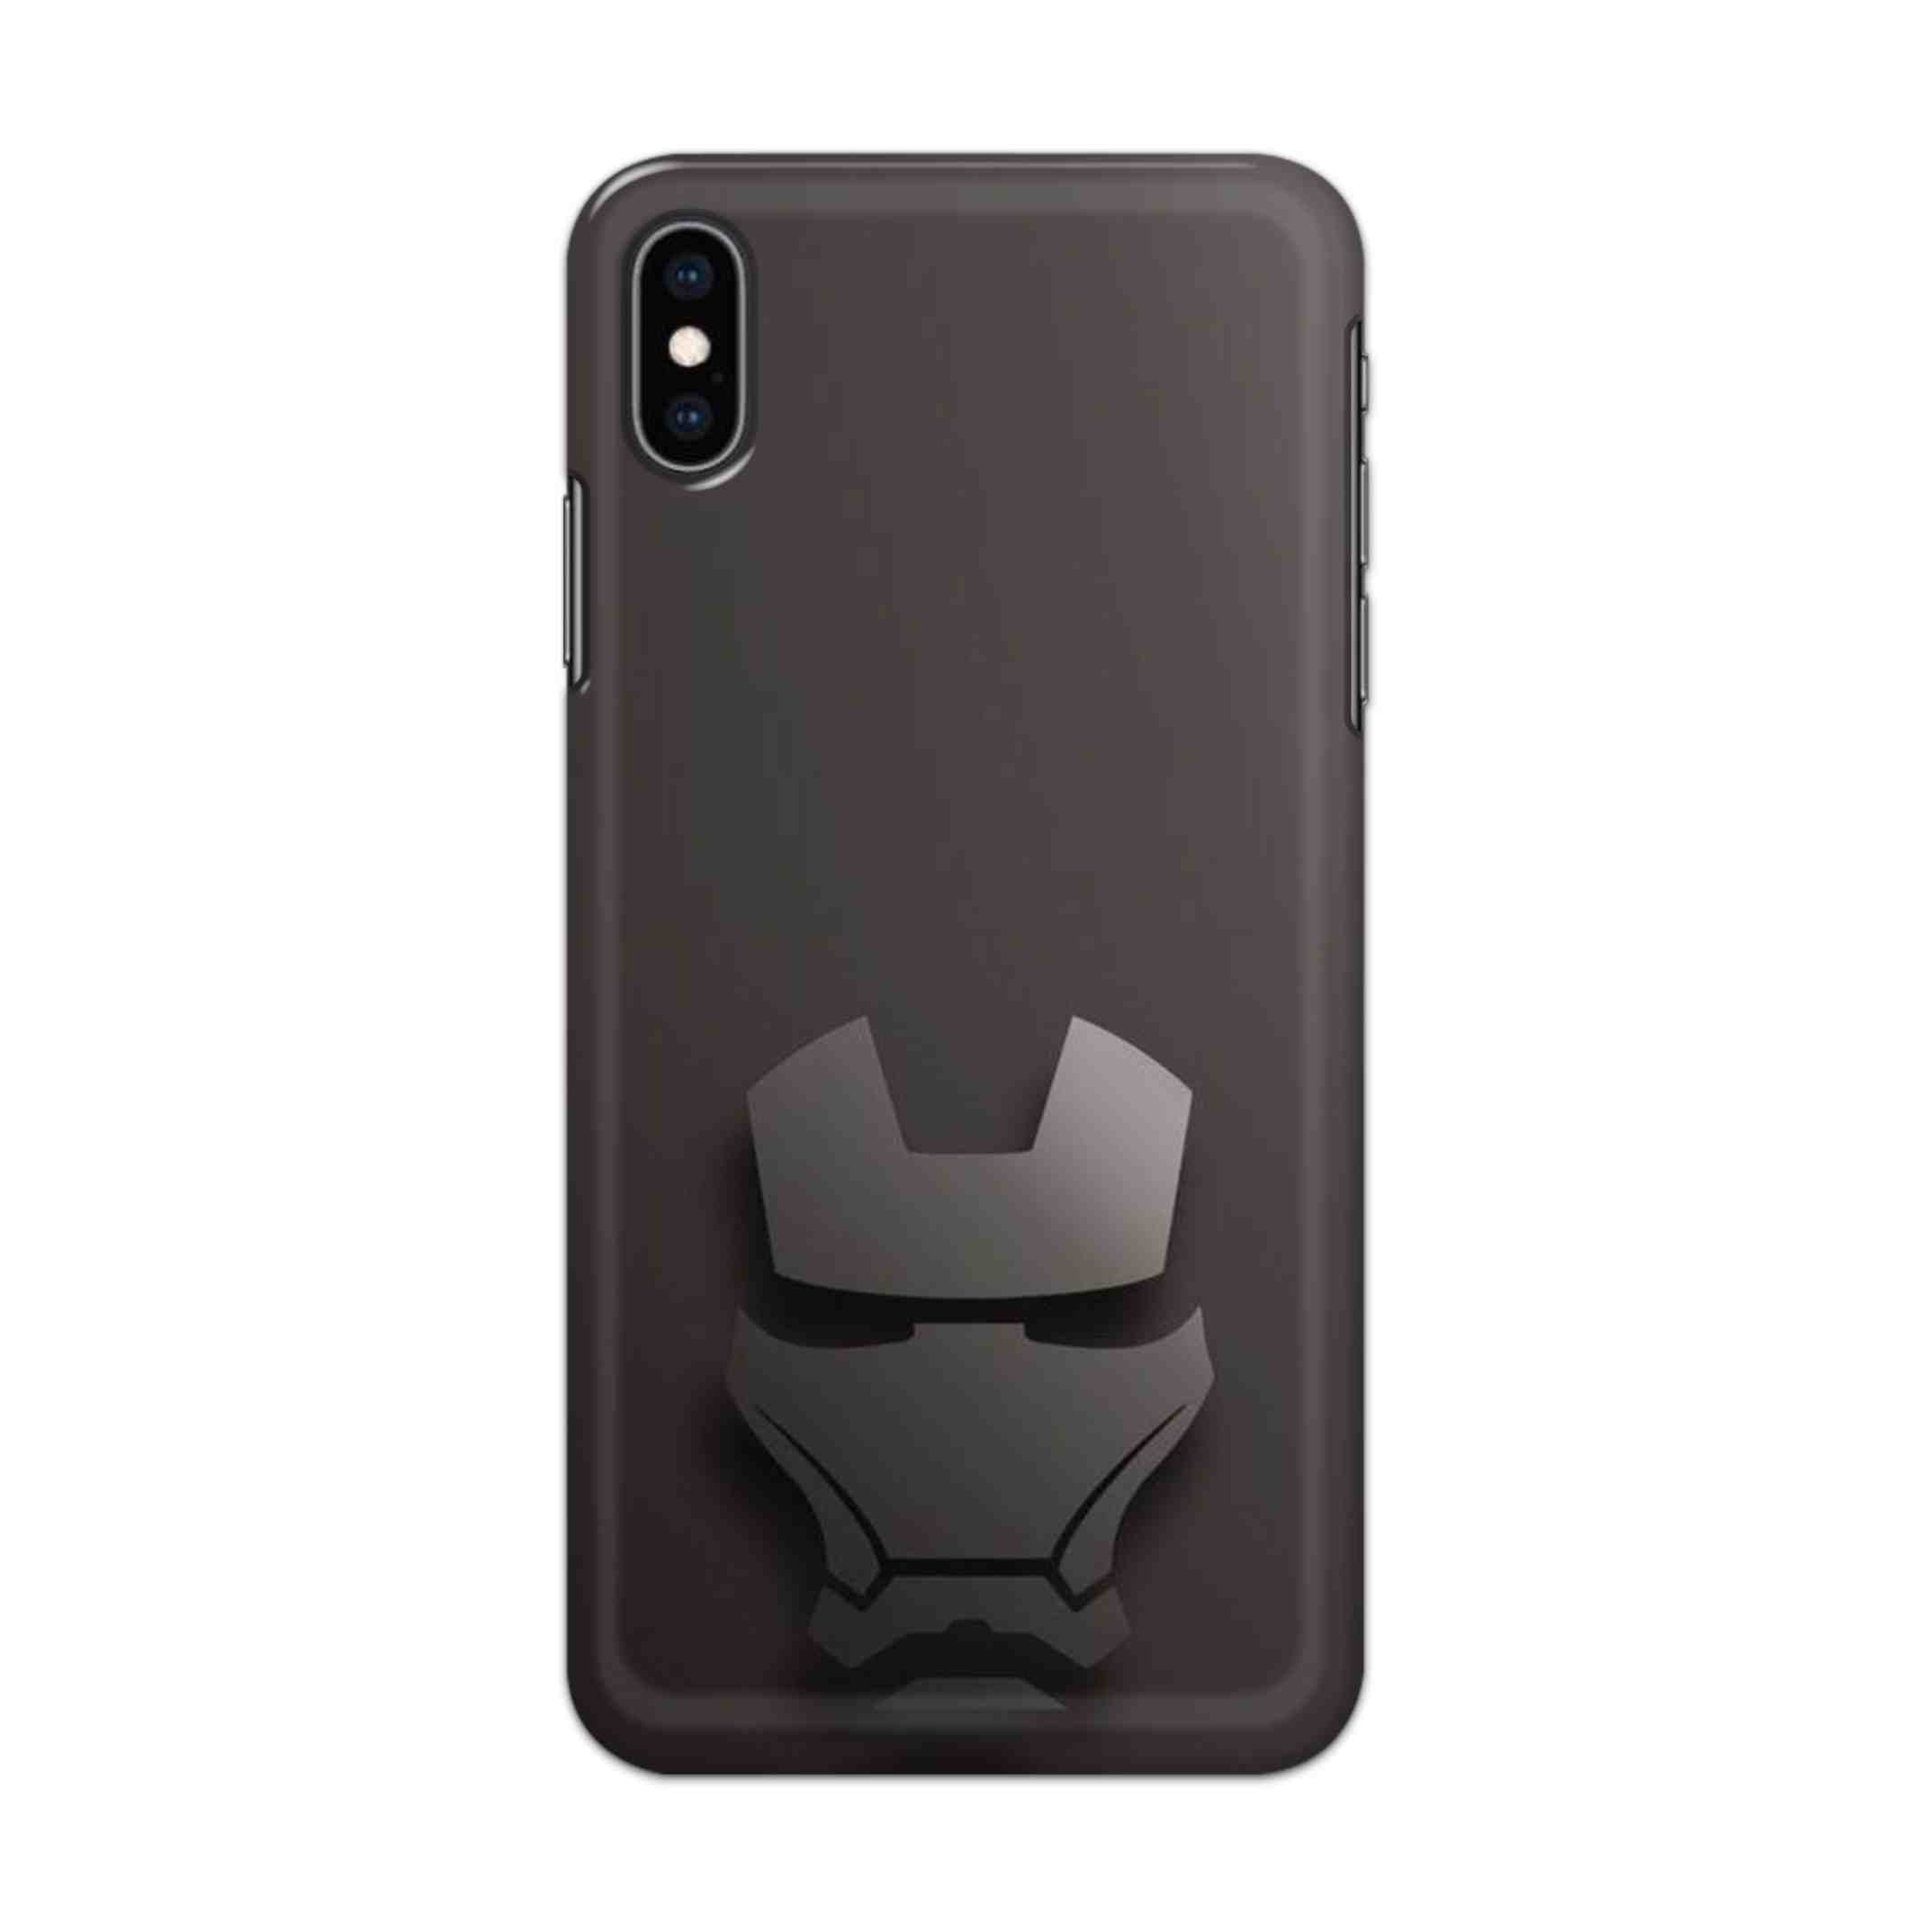 Buy Iron Man Logo Hard Back Mobile Phone Case/Cover For iPhone XS MAX Online